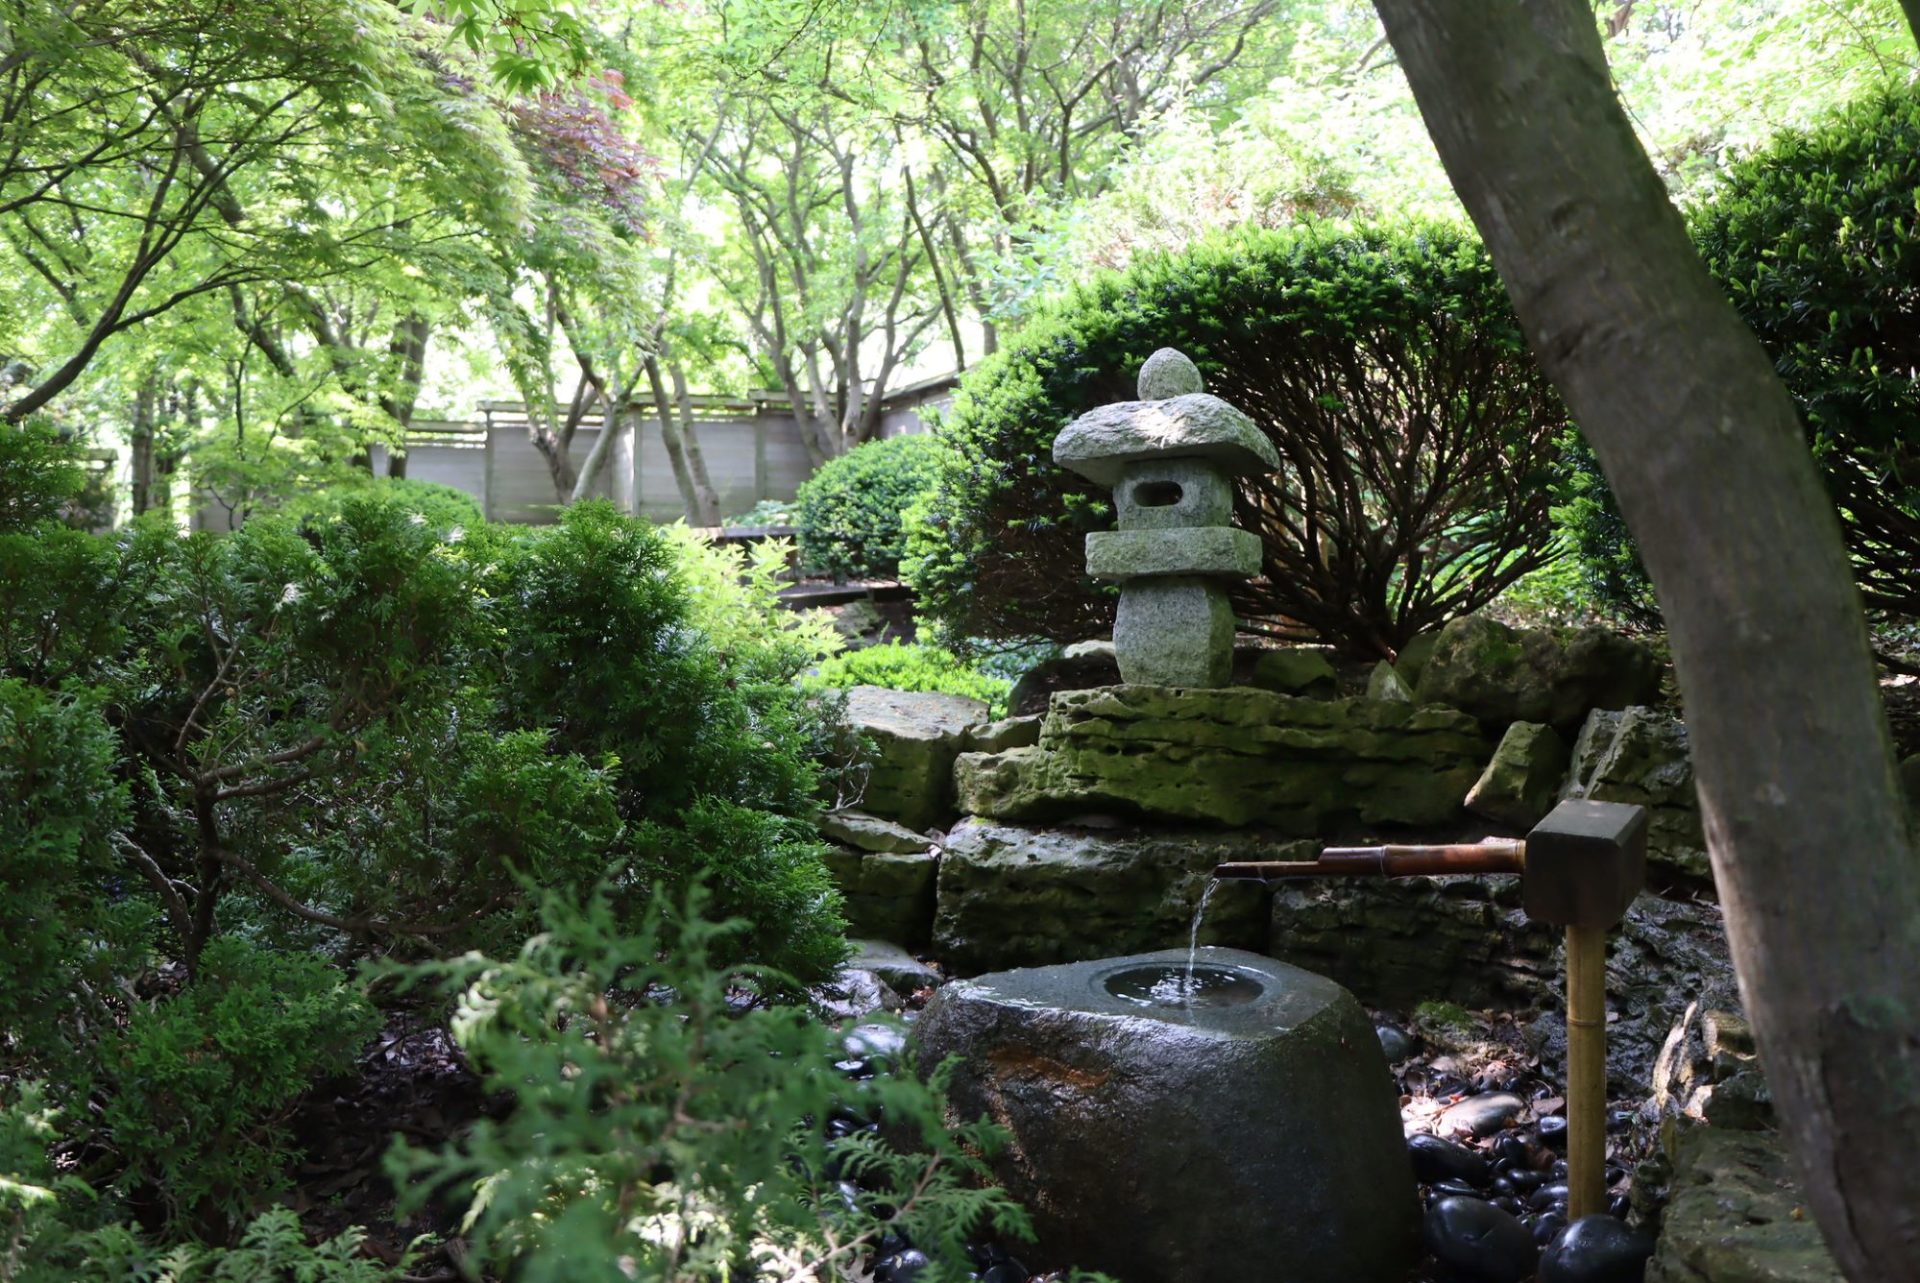 A tea garden with a stone fountain, surrounded by green trees and bushes.